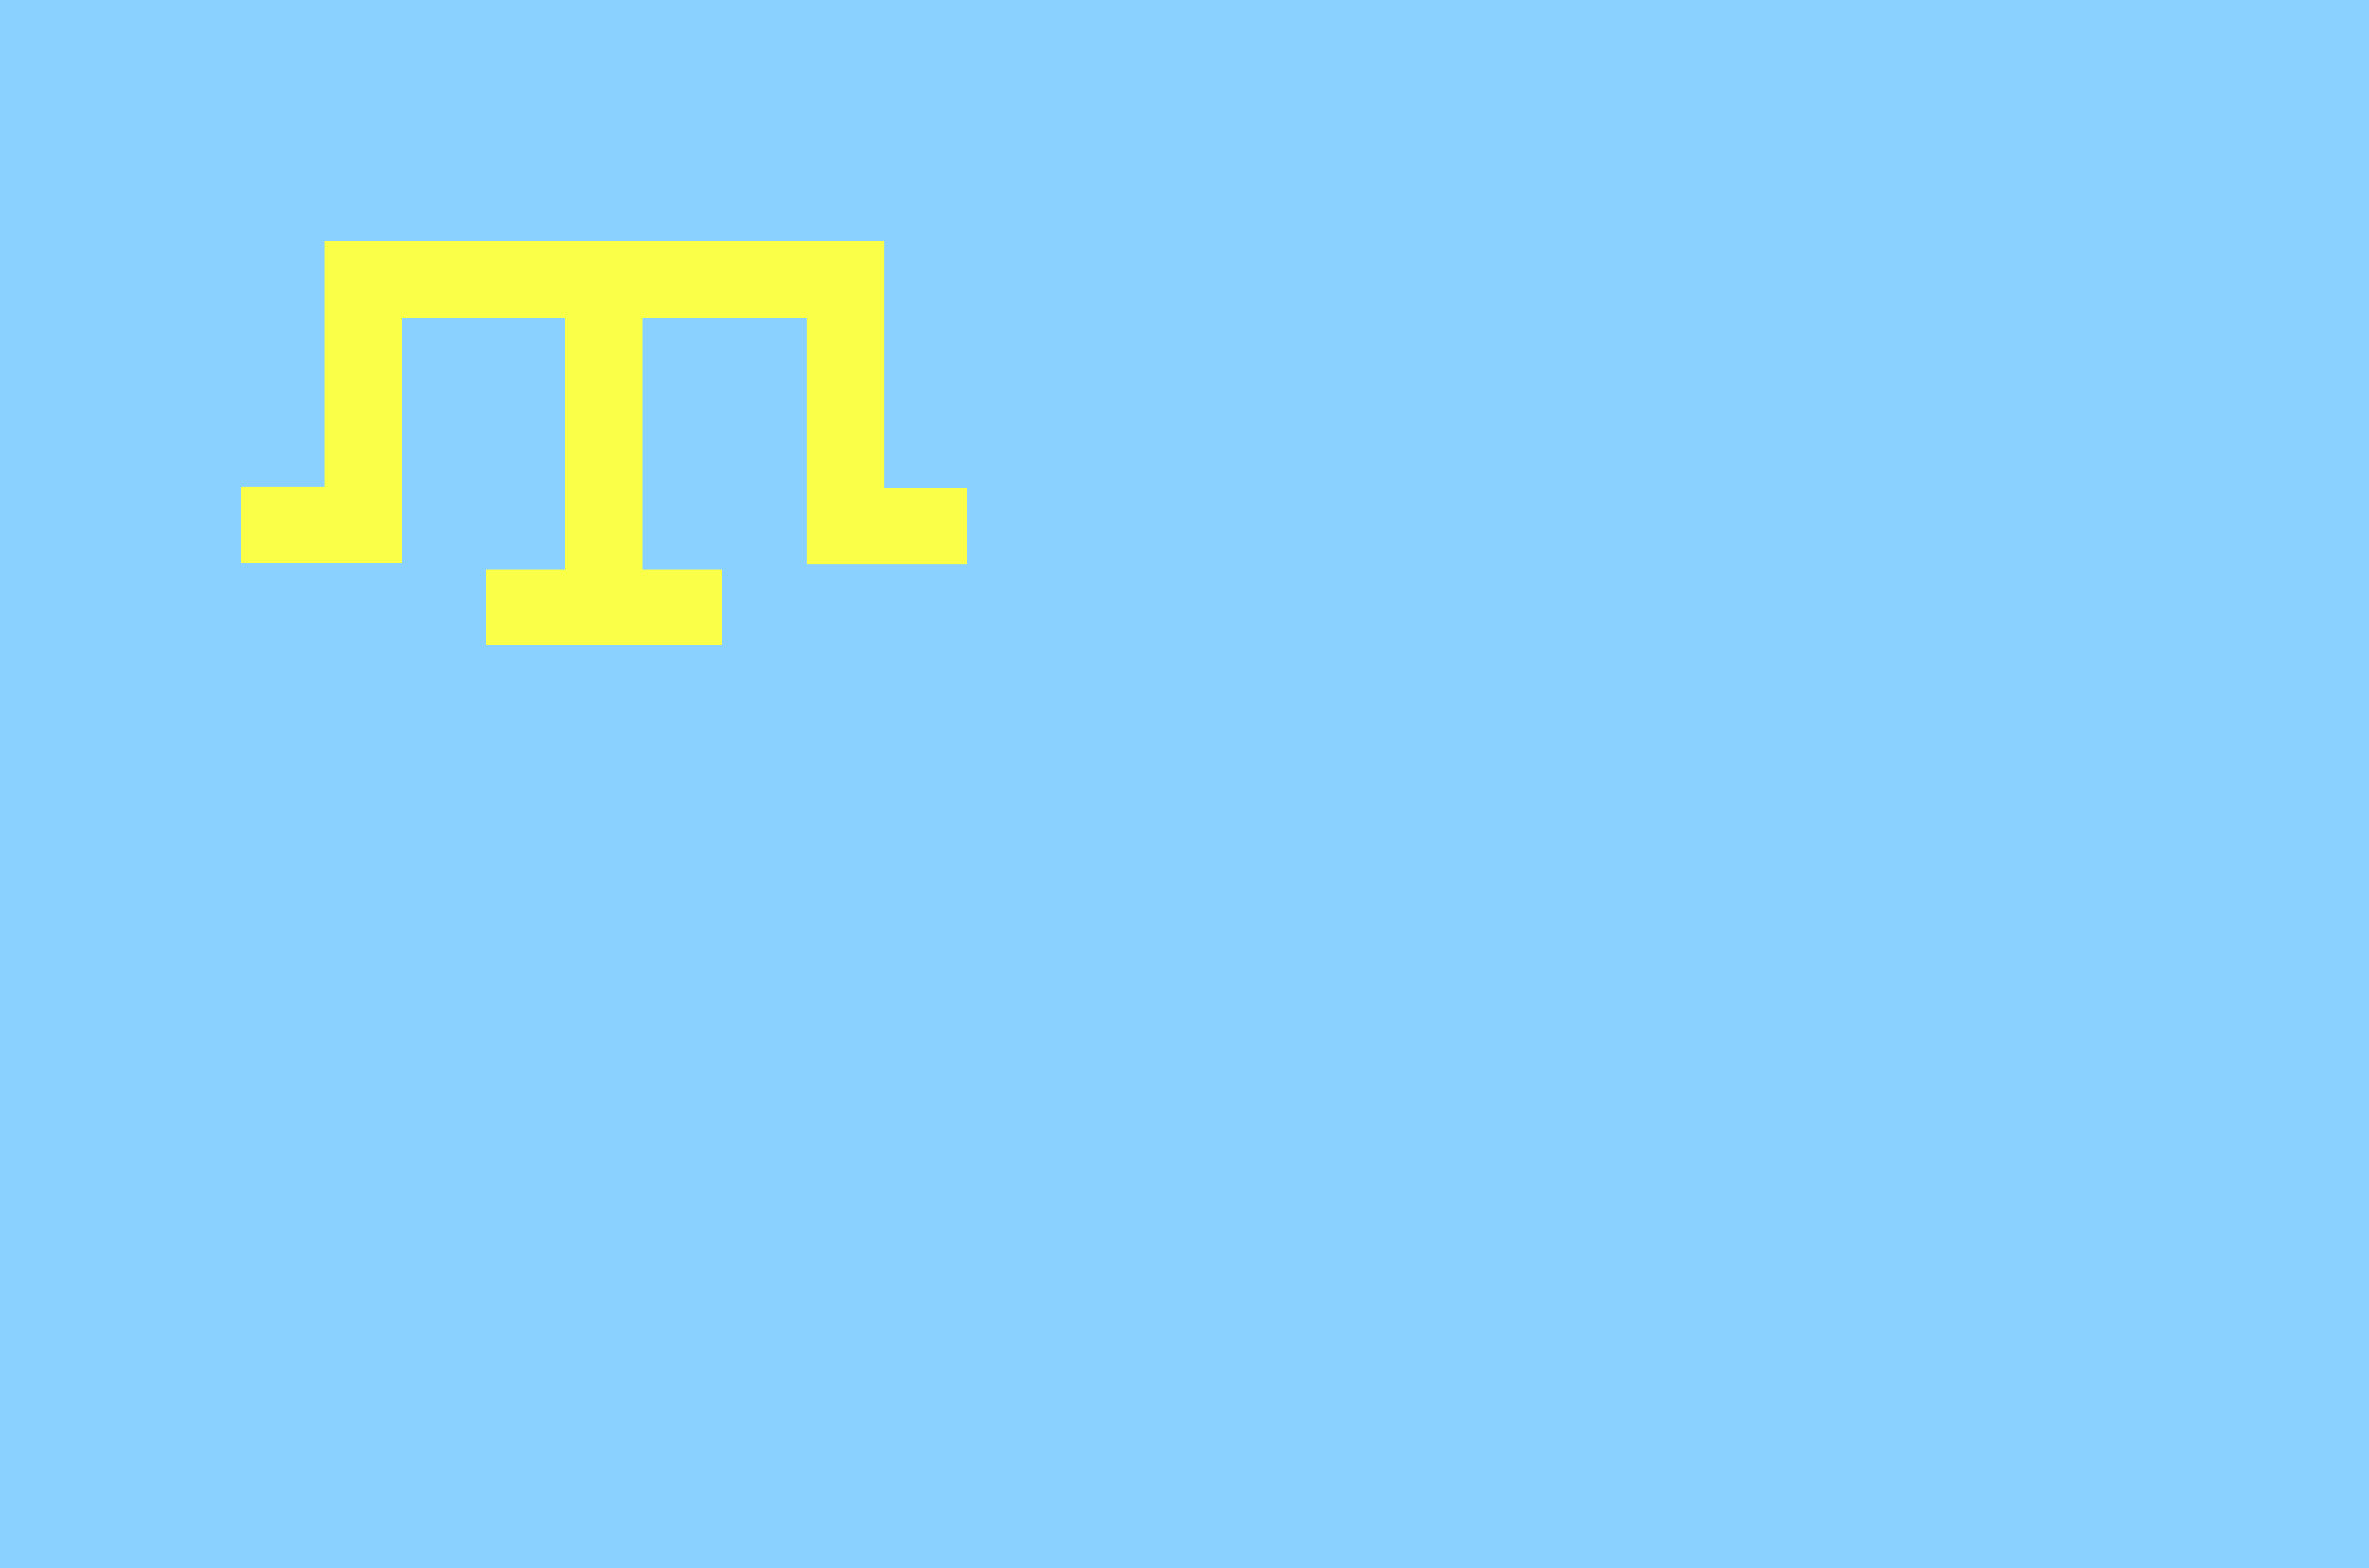 https://upload.wikimedia.org/wikipedia/commons/5/59/Flag_of_the_Crimean_Tatar_people.PNG